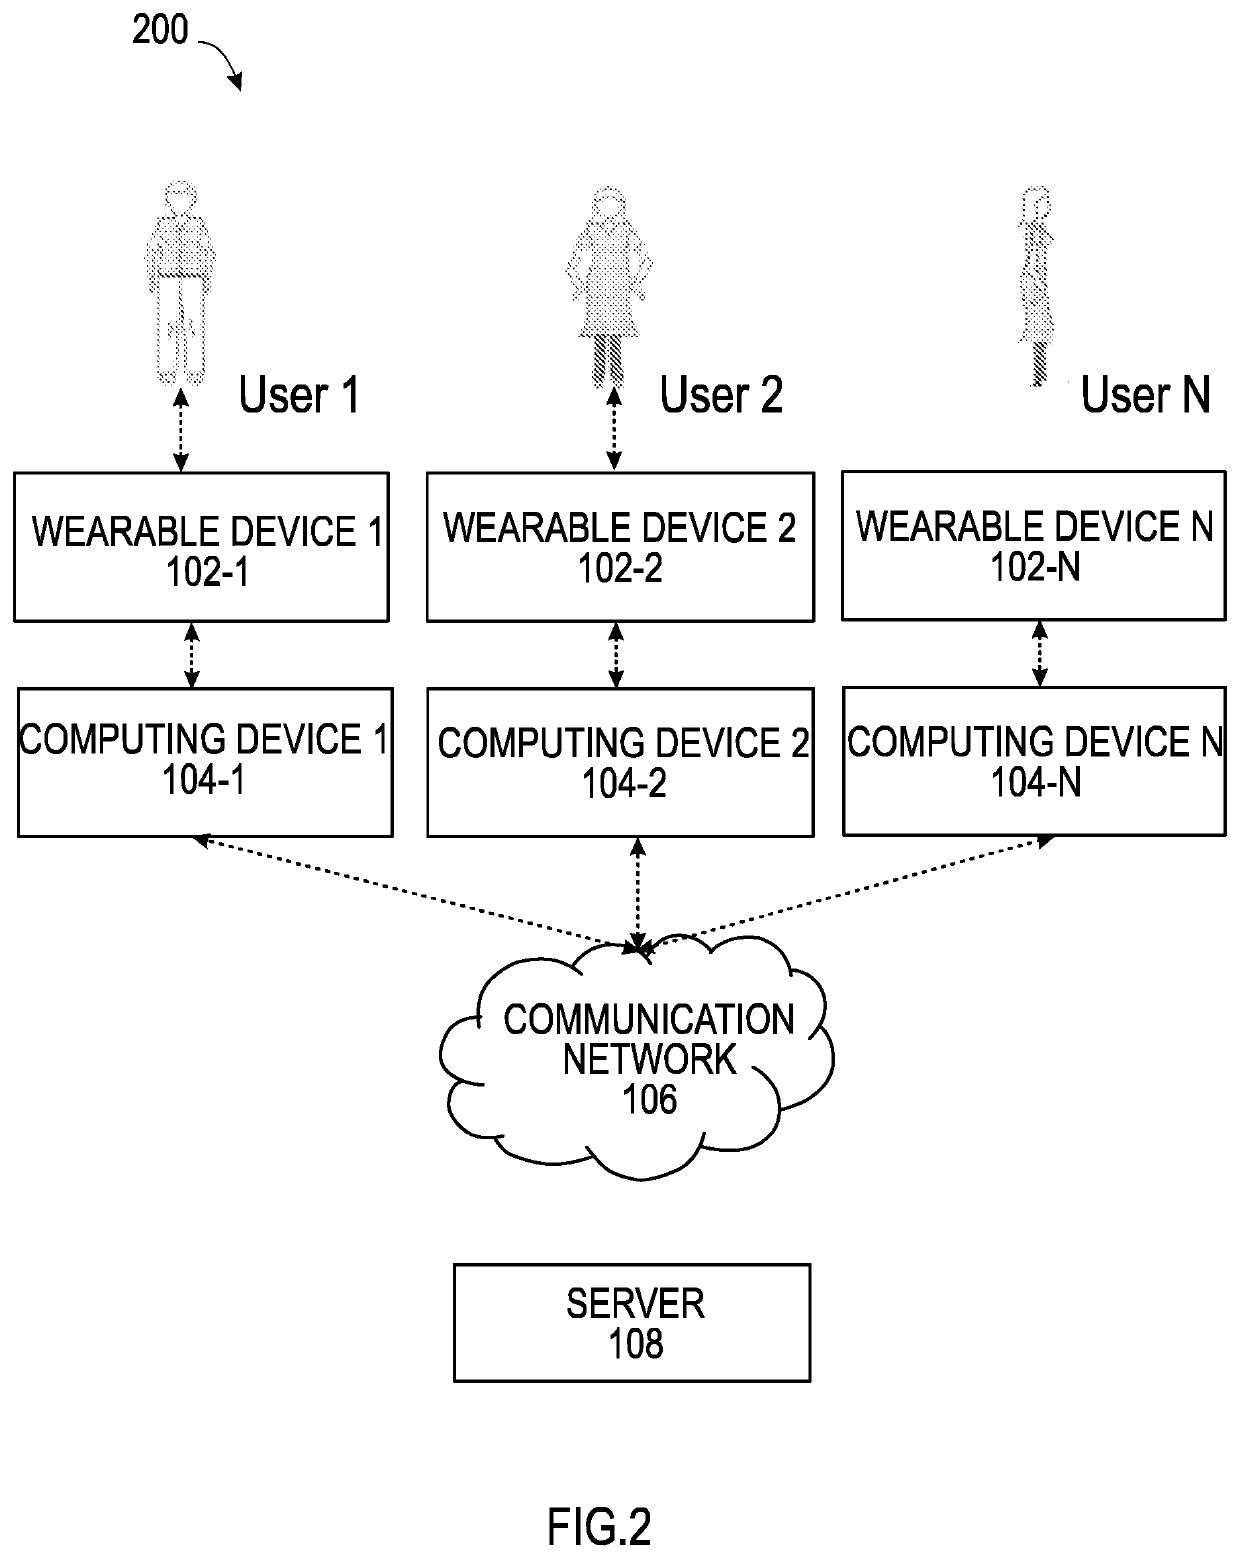 System and method for collecting, analyzing and sharing biorhythm data among users